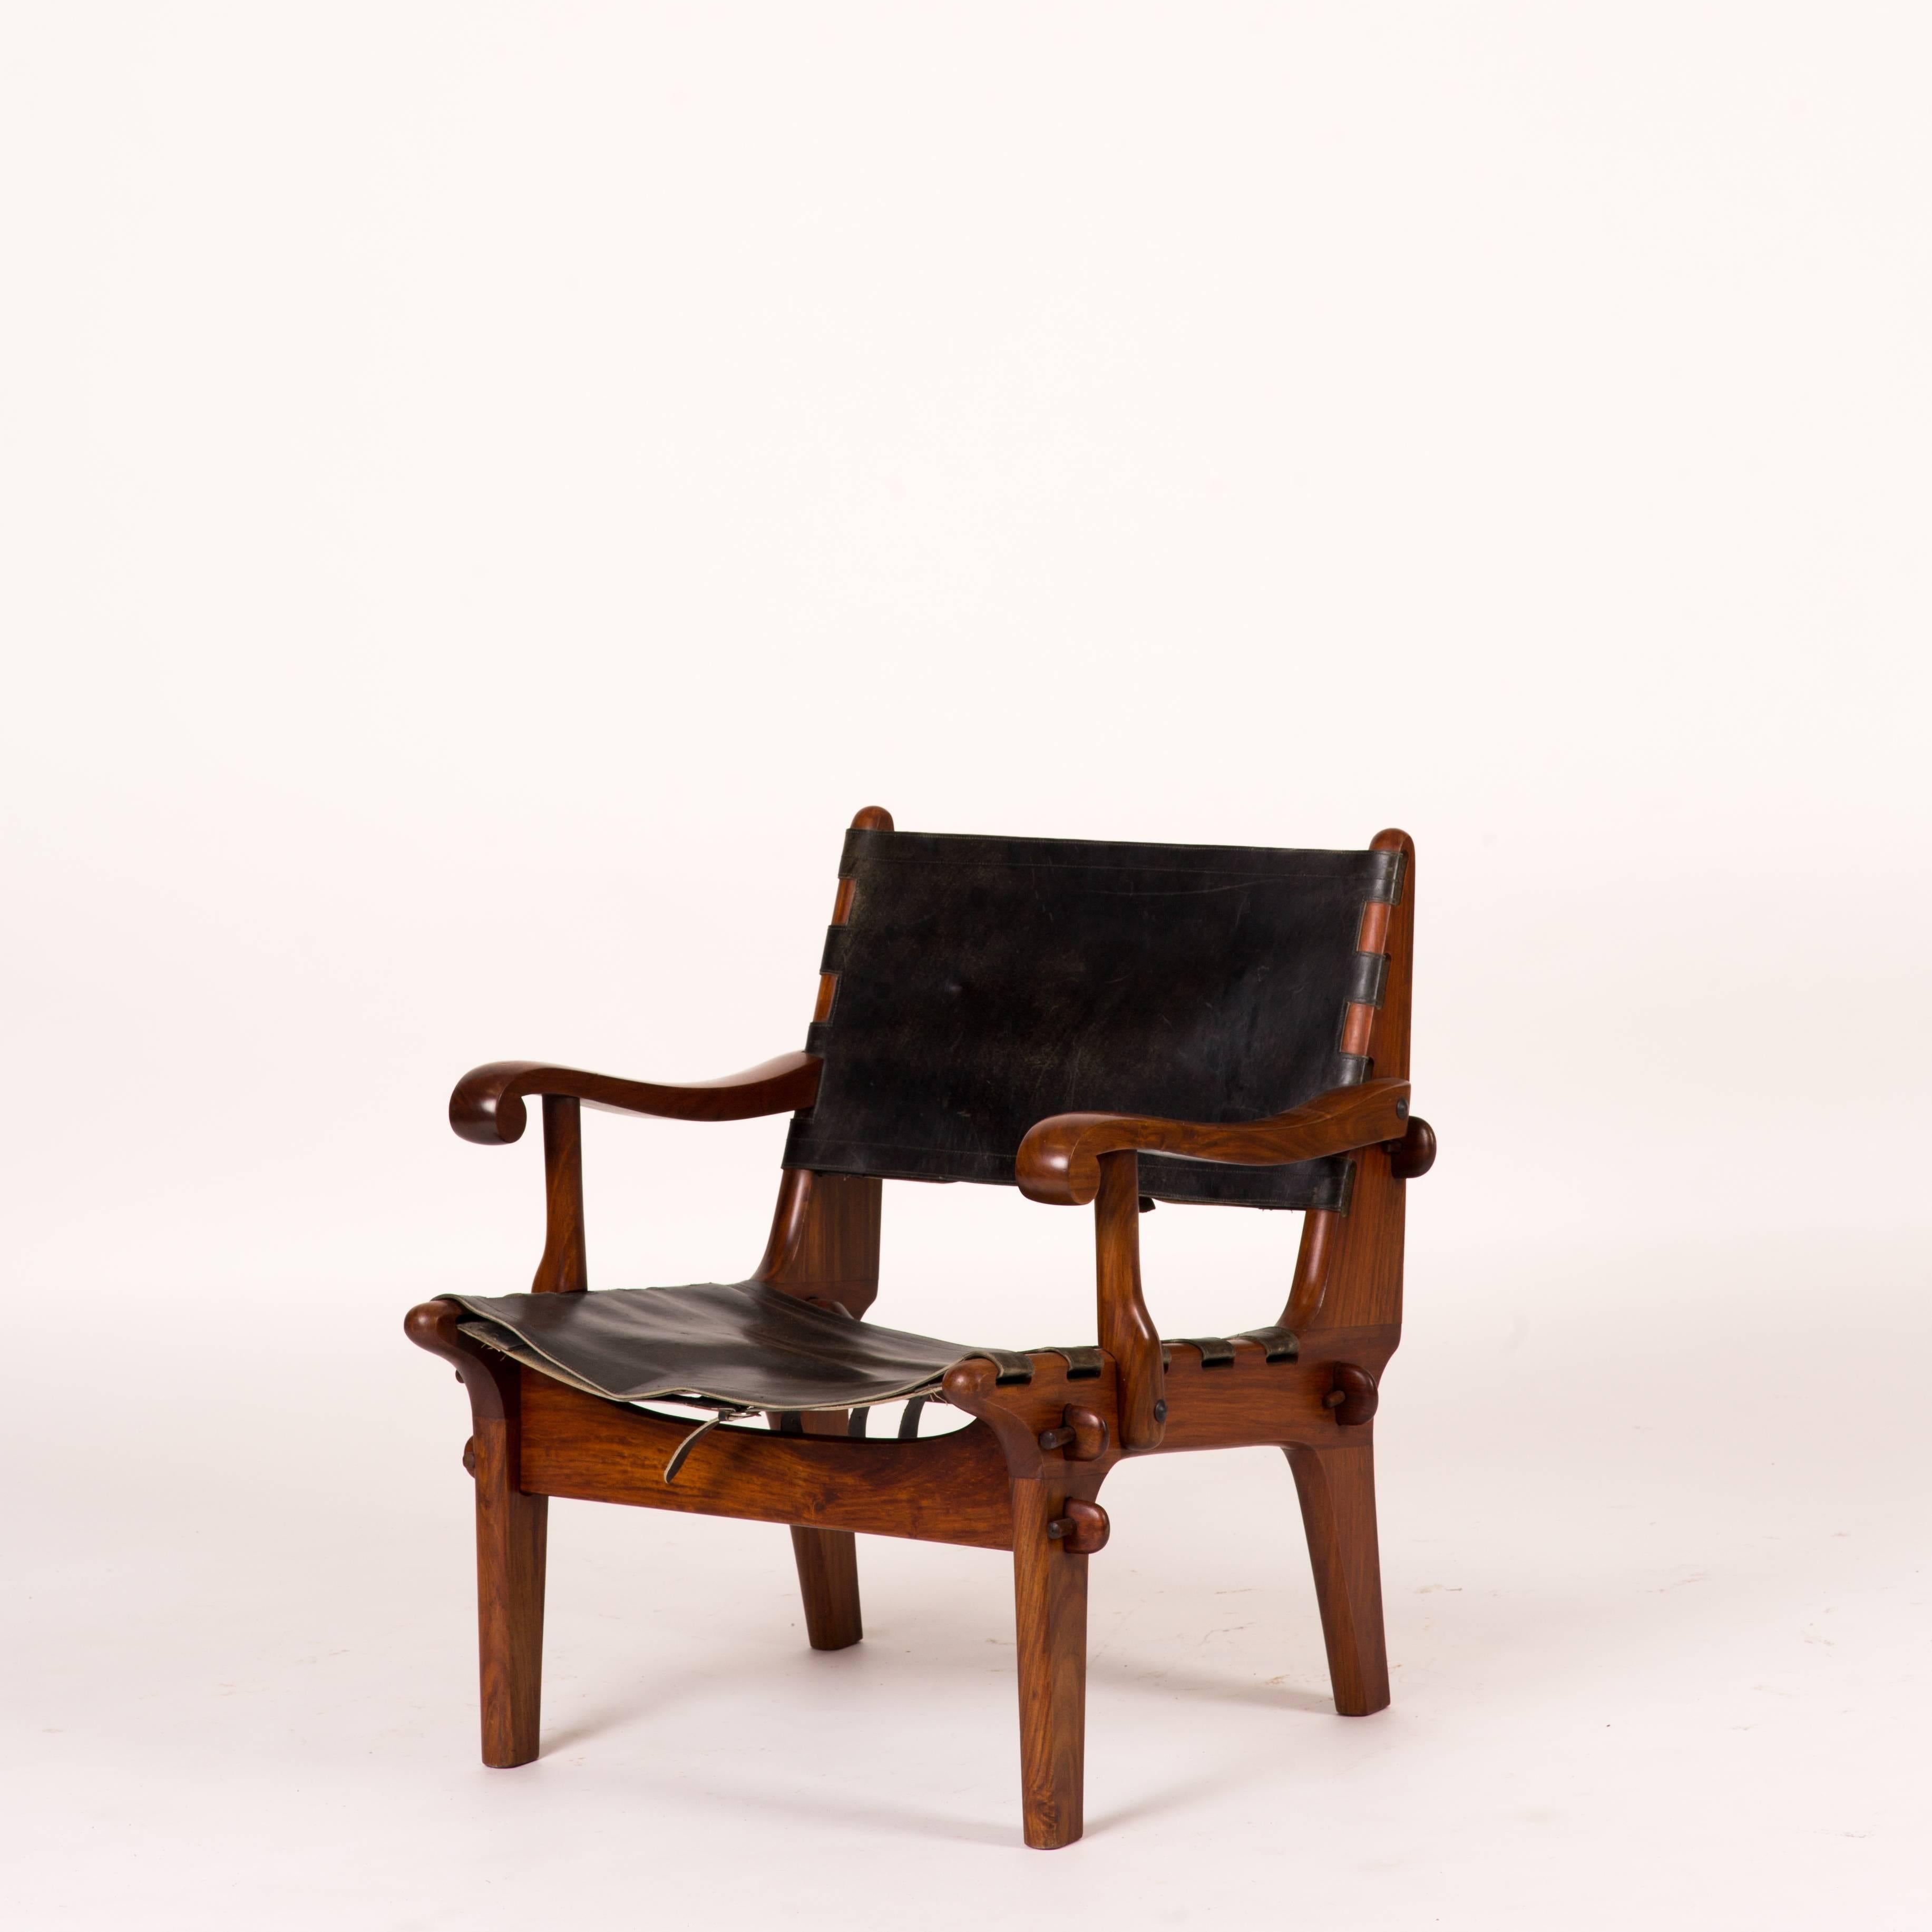 Two modernist armchairs by Angel Pazmino. These chairs feature leather slings with Aztec tooling designs often typical of Pazmino's furniture. Both chairs come with a footstool of the same design.